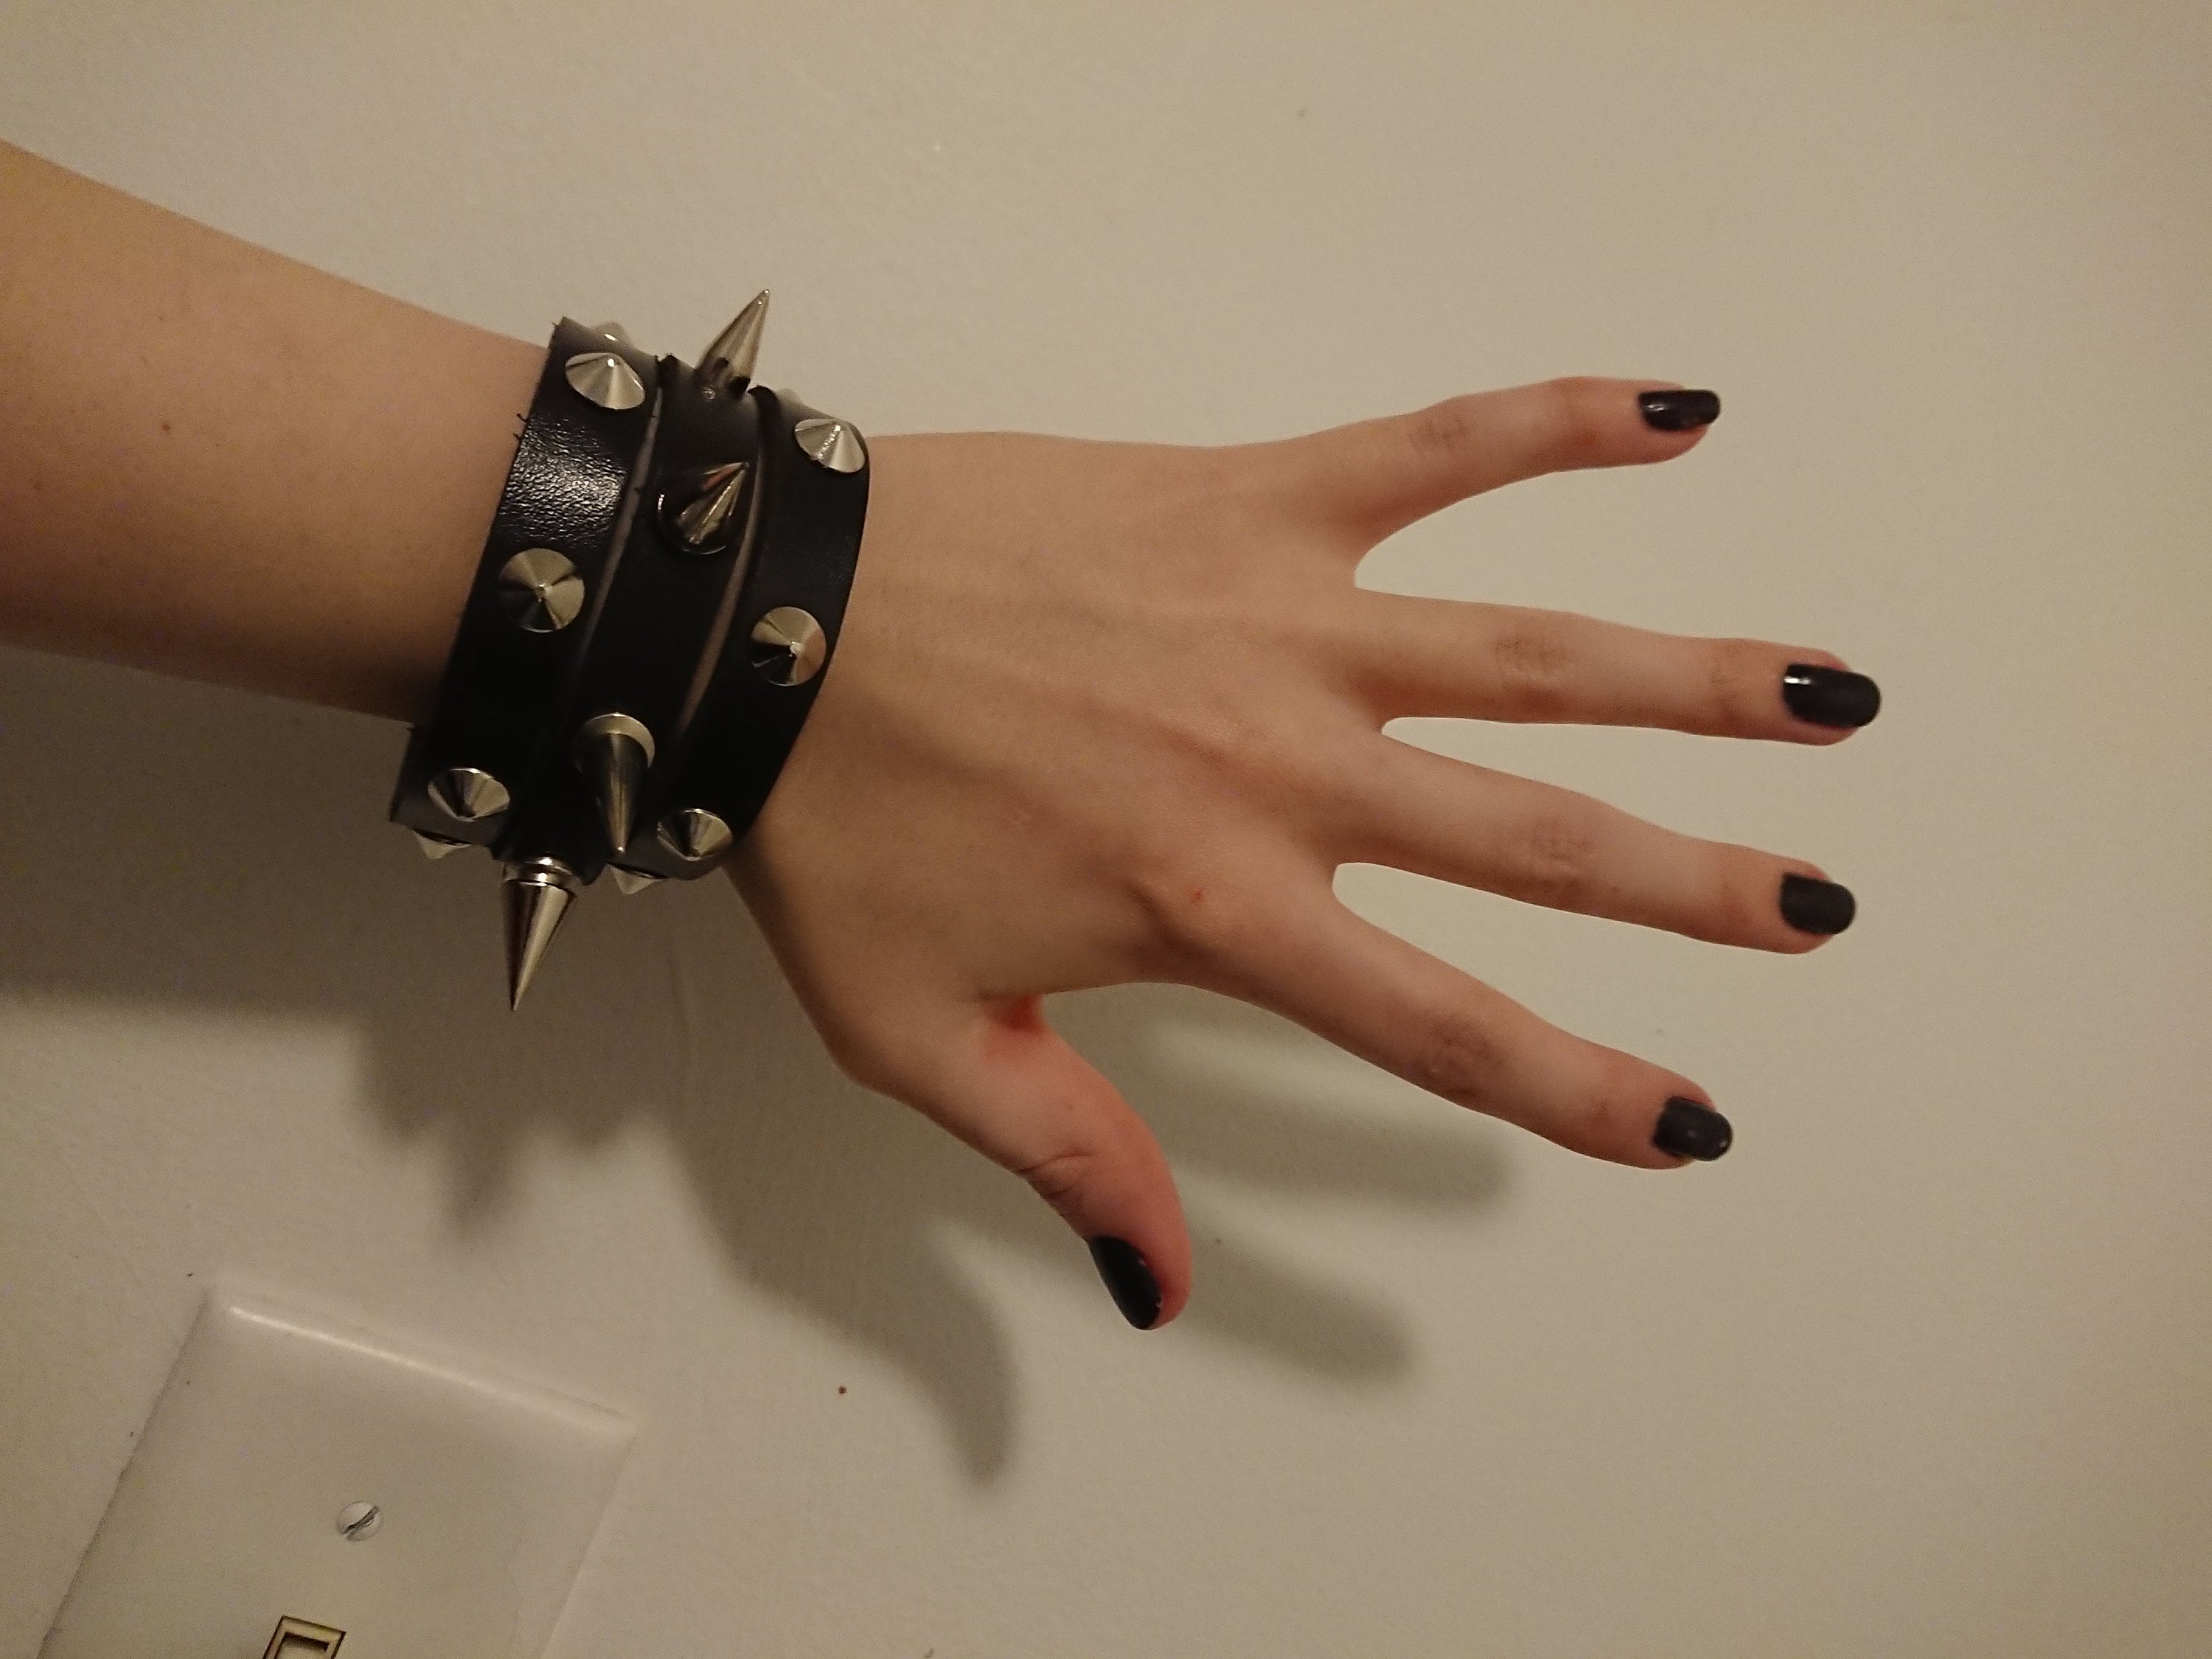 Pair of Spiked Black Leather Wrist Cuffs, Unisex Goth Punk Bracelets,  Gothic Metal Spikes Emo Alternative 3 in One - Etsy